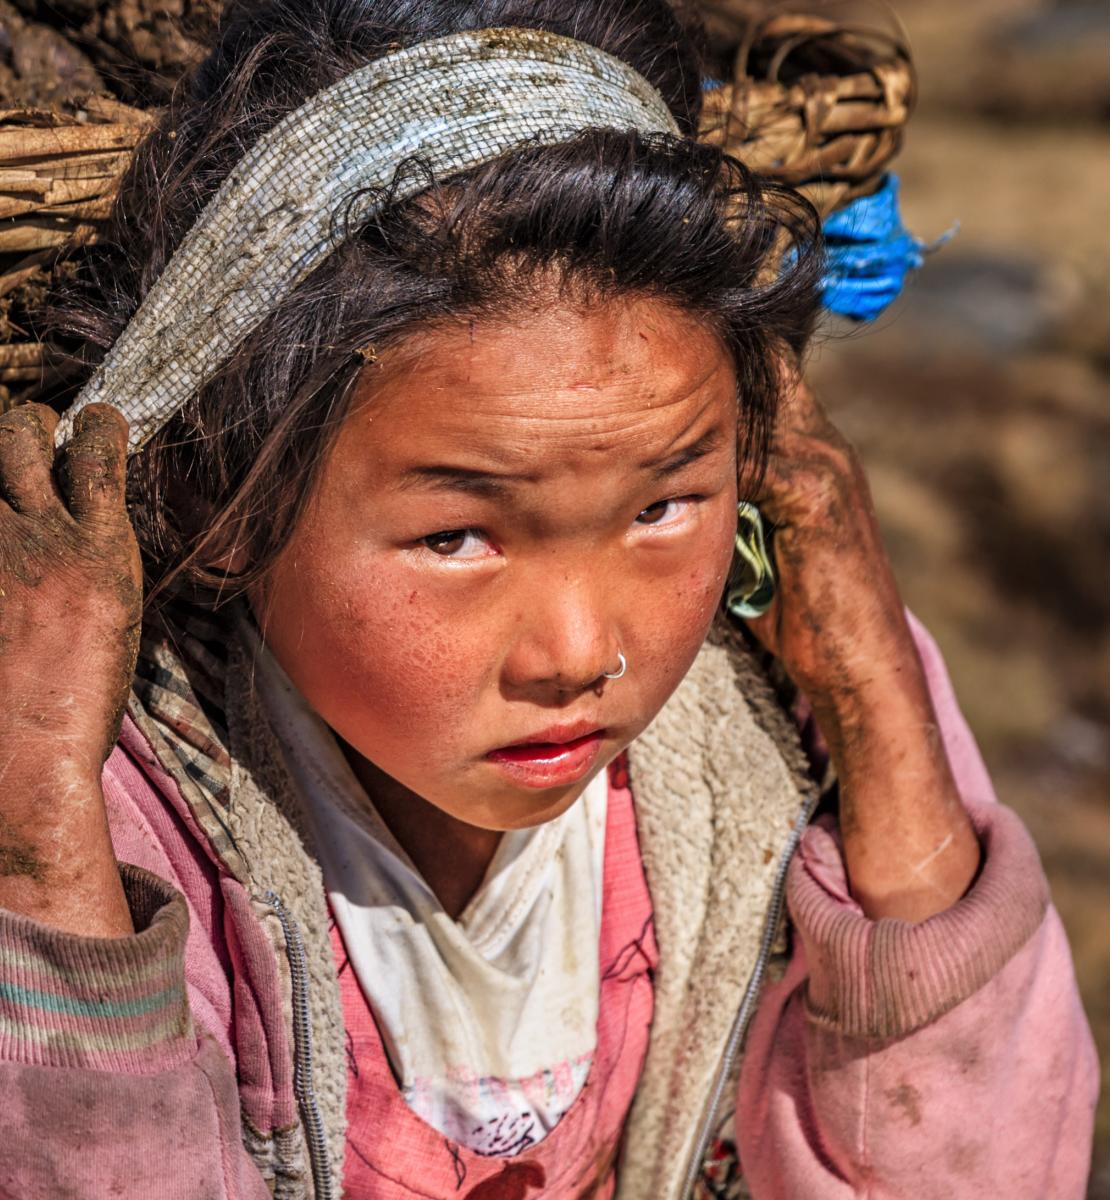 A young girl, with dirt on her hands and face, carries a large basket on her back.